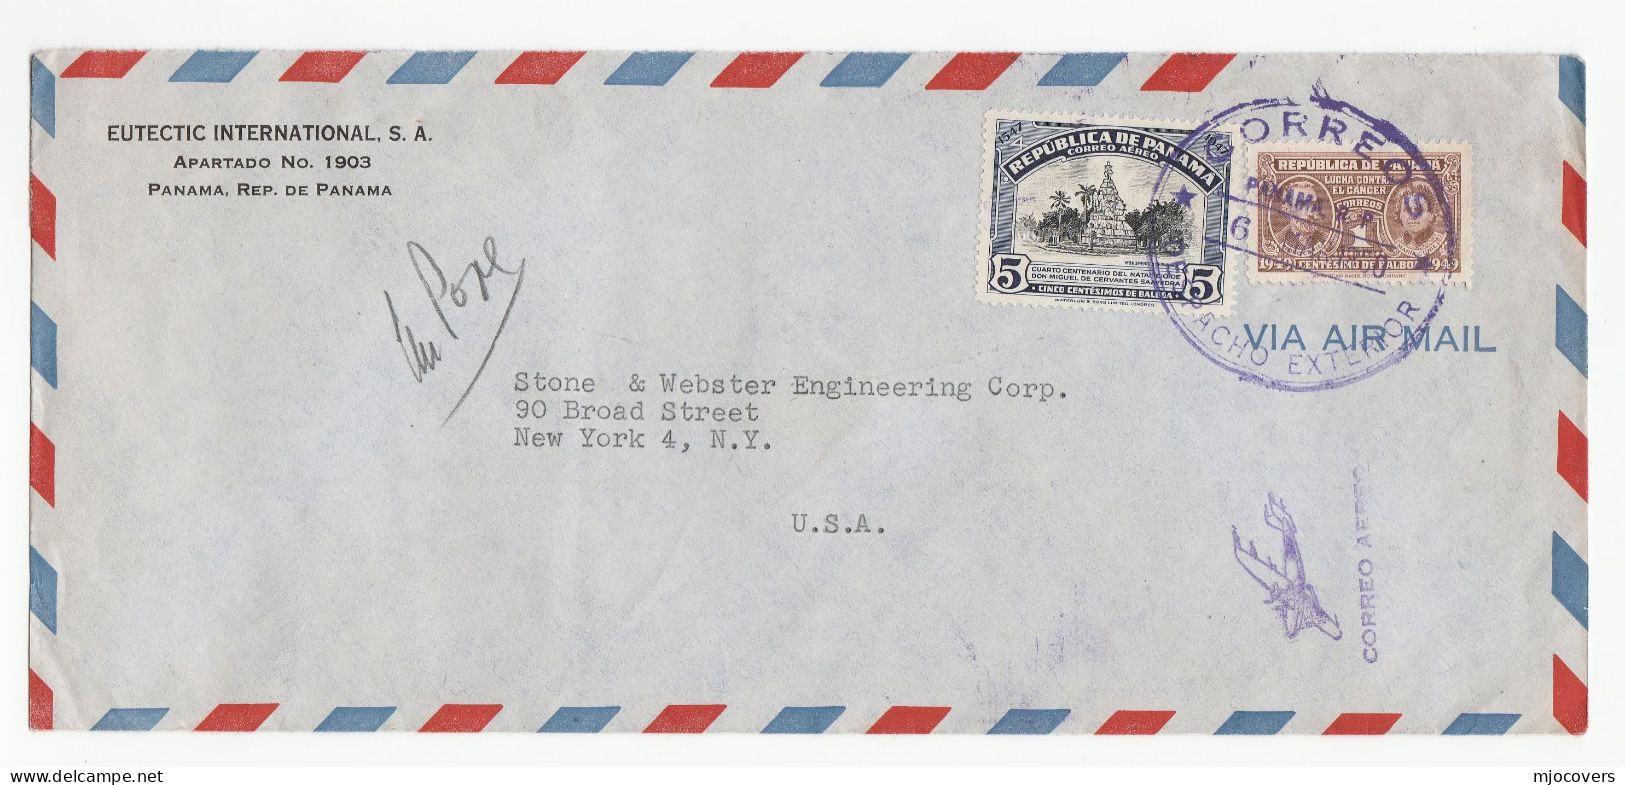 CANCER  - 1950 Panama COVER  Marie CURIE Anti Cancer Stamps Air Mail To USA Chemistry Health Medicine - Krankheiten